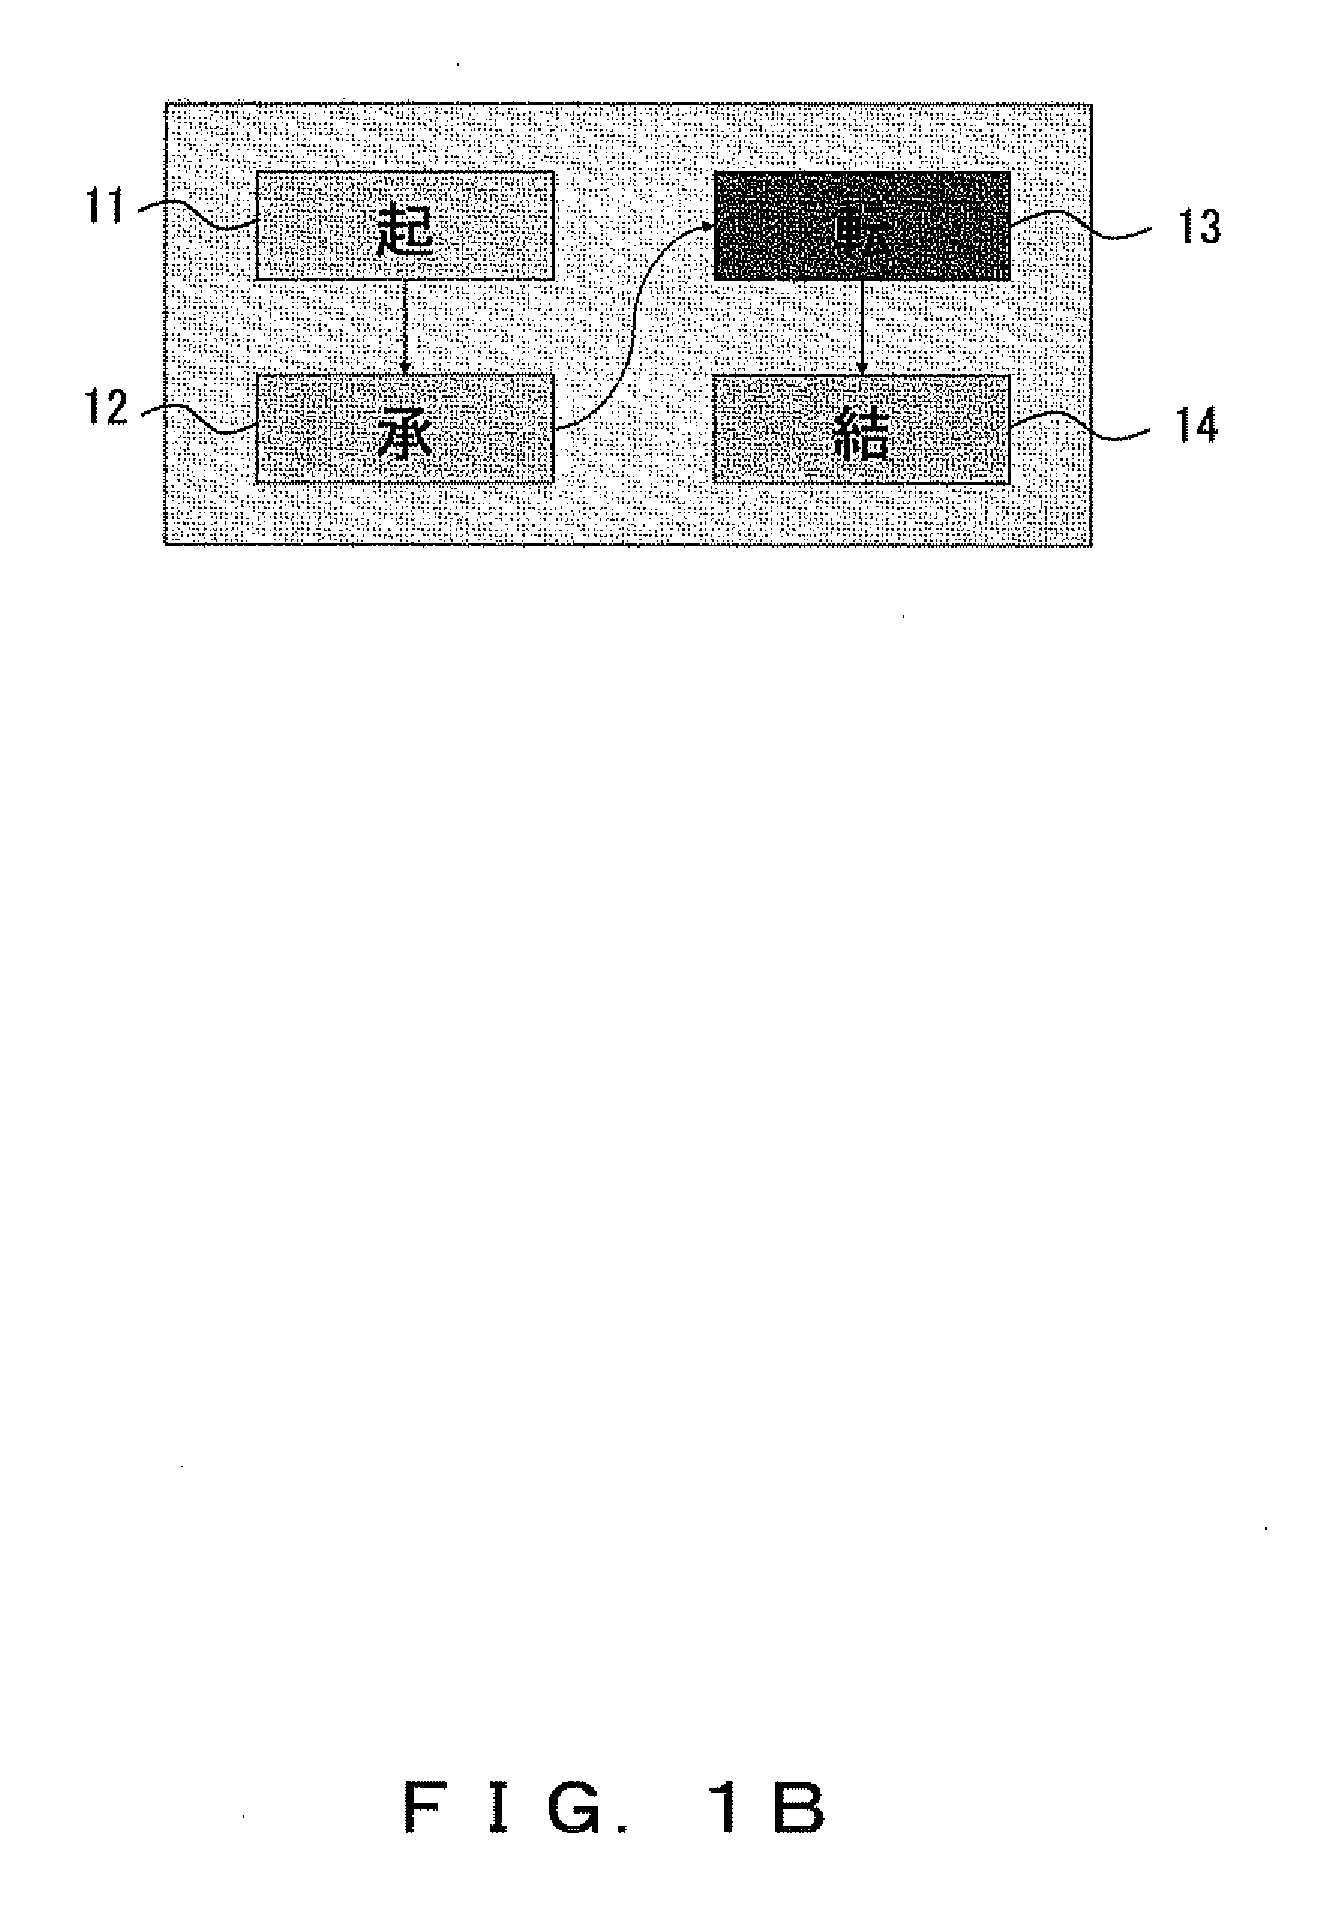 Electronic watermark embedding apparatus and electronic watermark detection apparatus